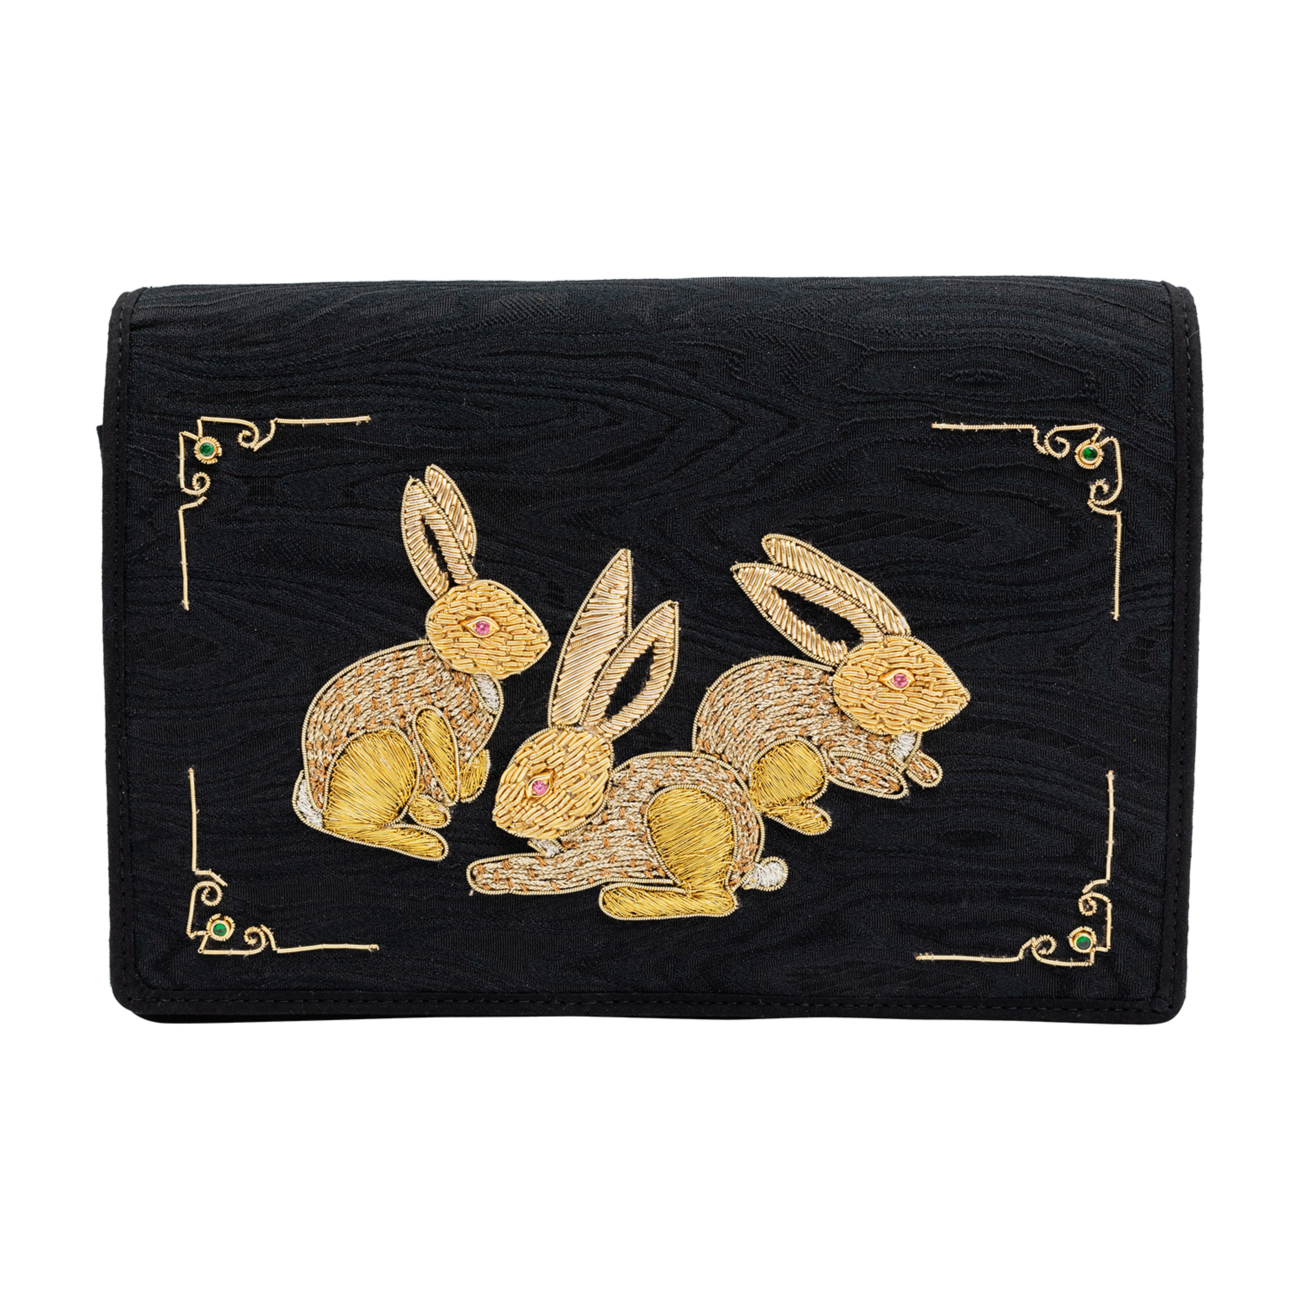 Grazing Rabbits Embroidered Clutch